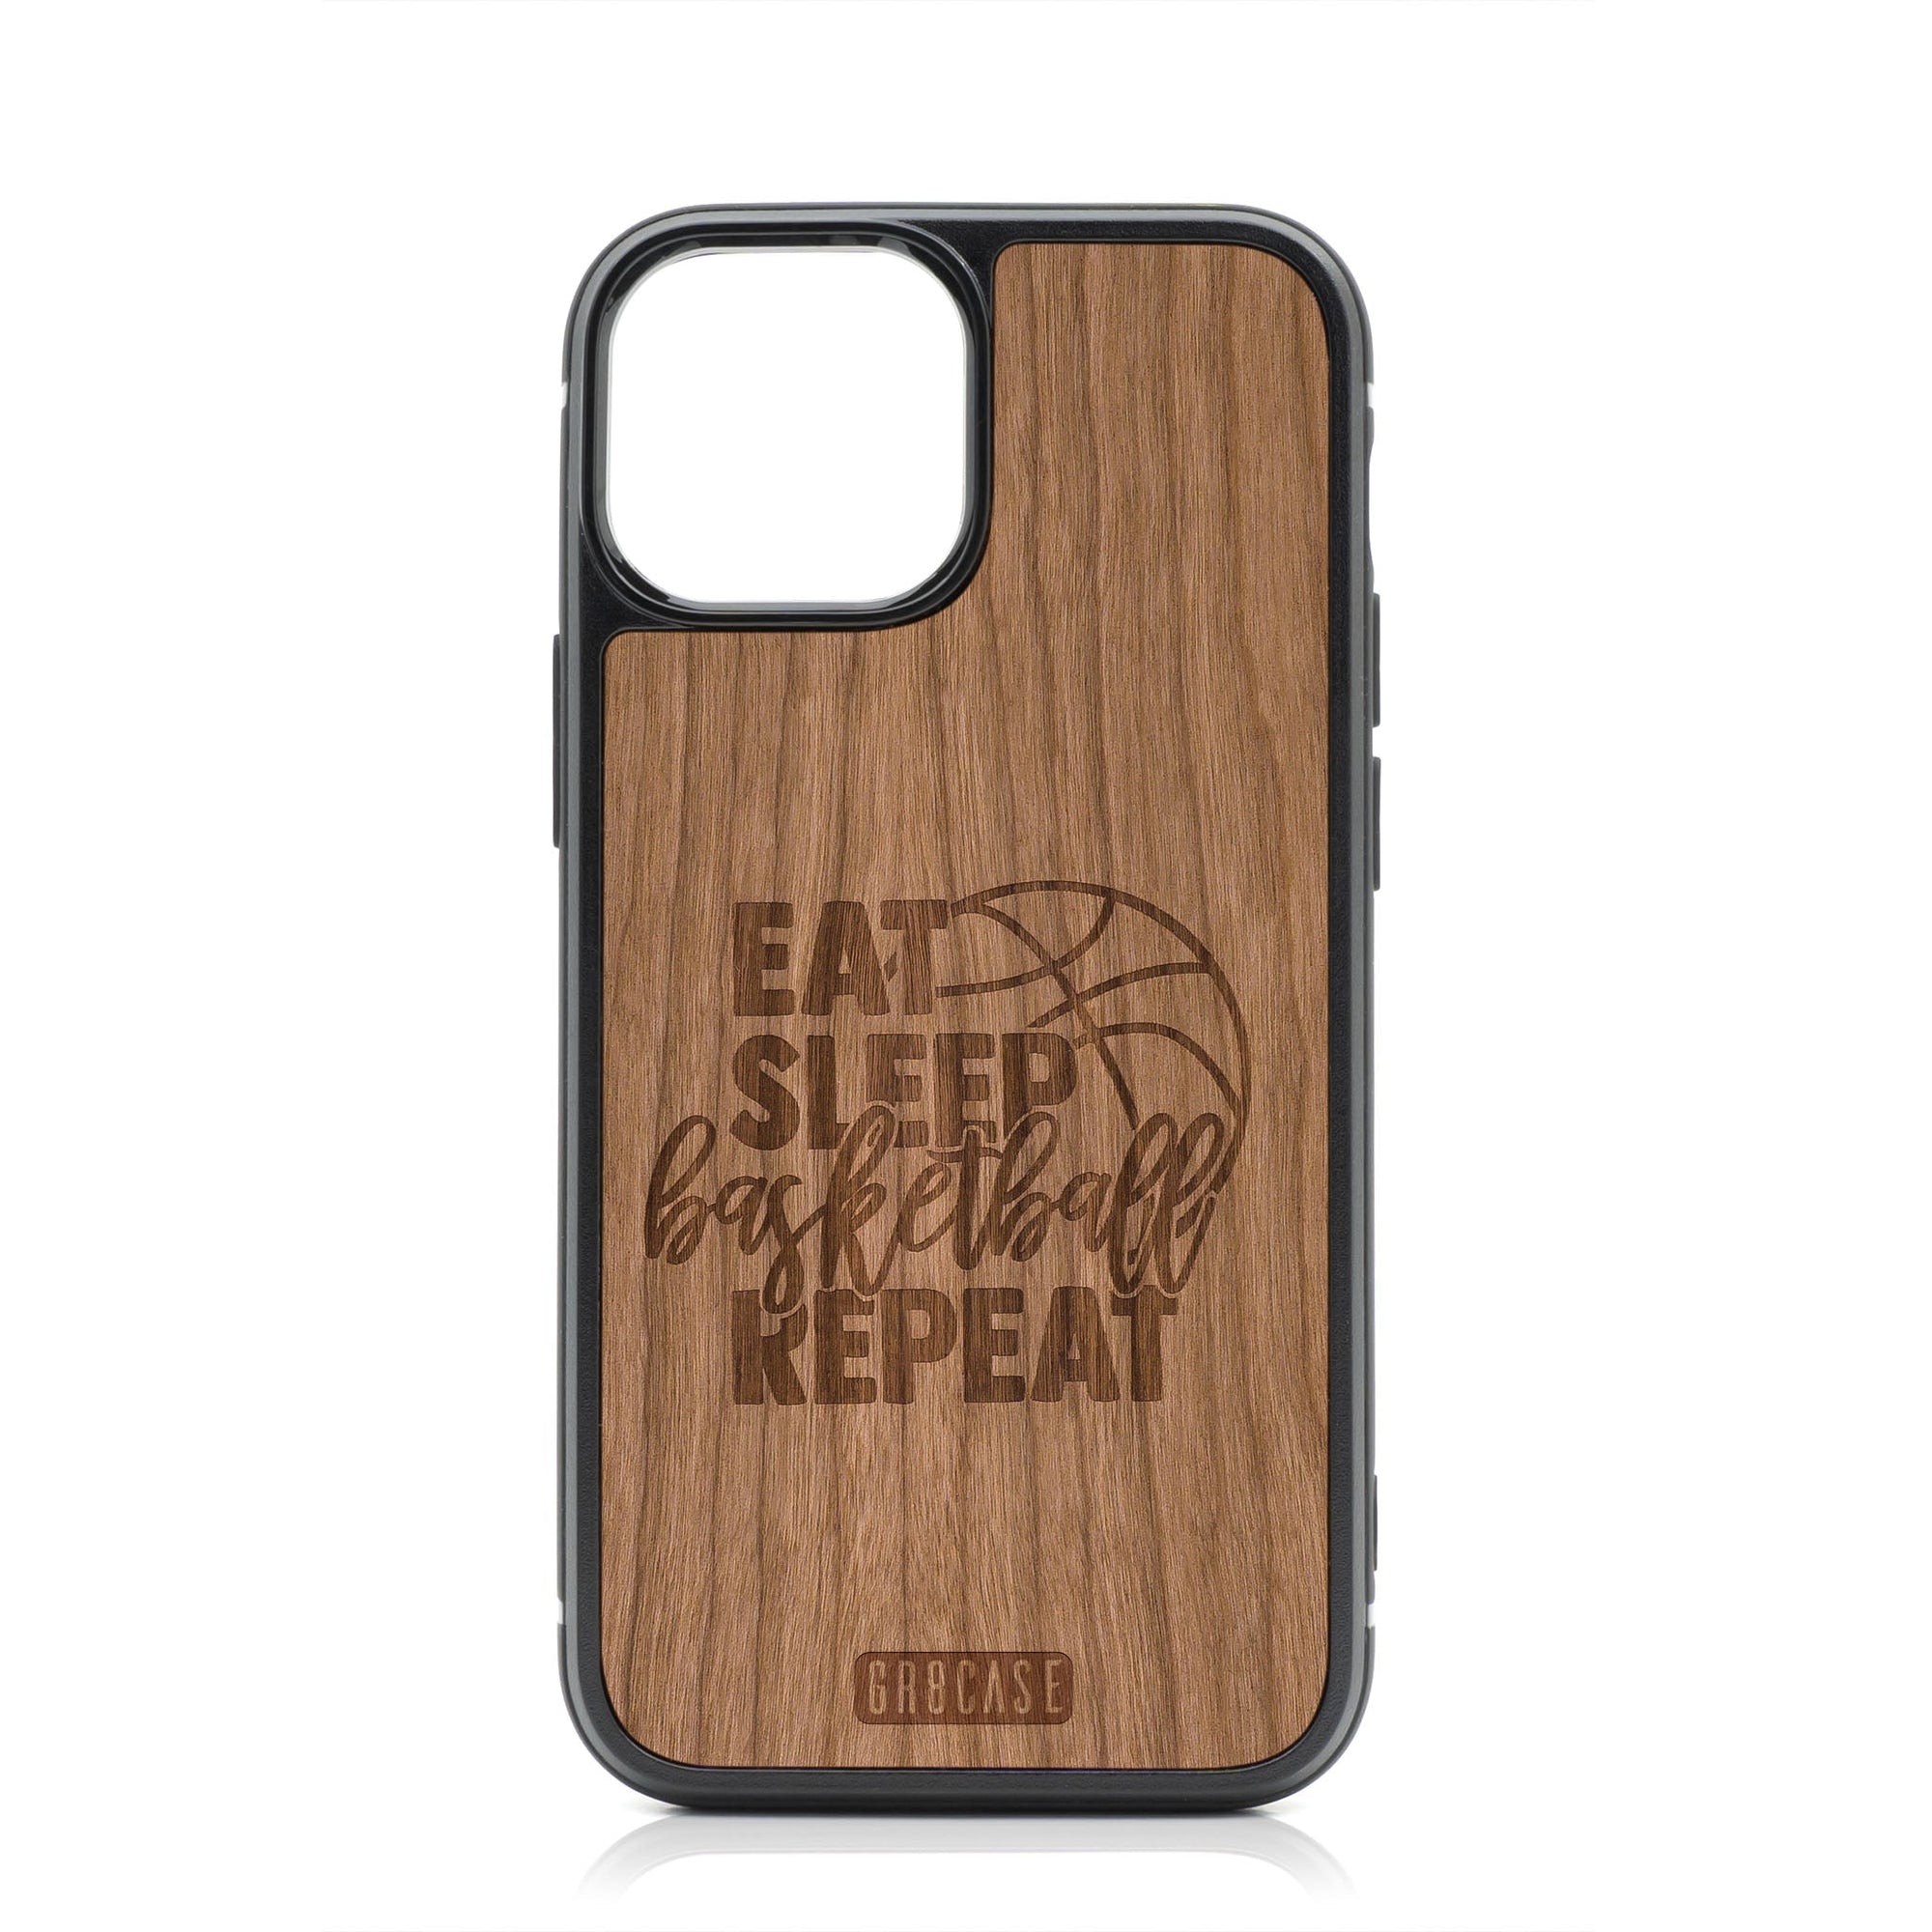 Eat Sleep Basketball Repeat Design Wood Case For iPhone 15 Plus